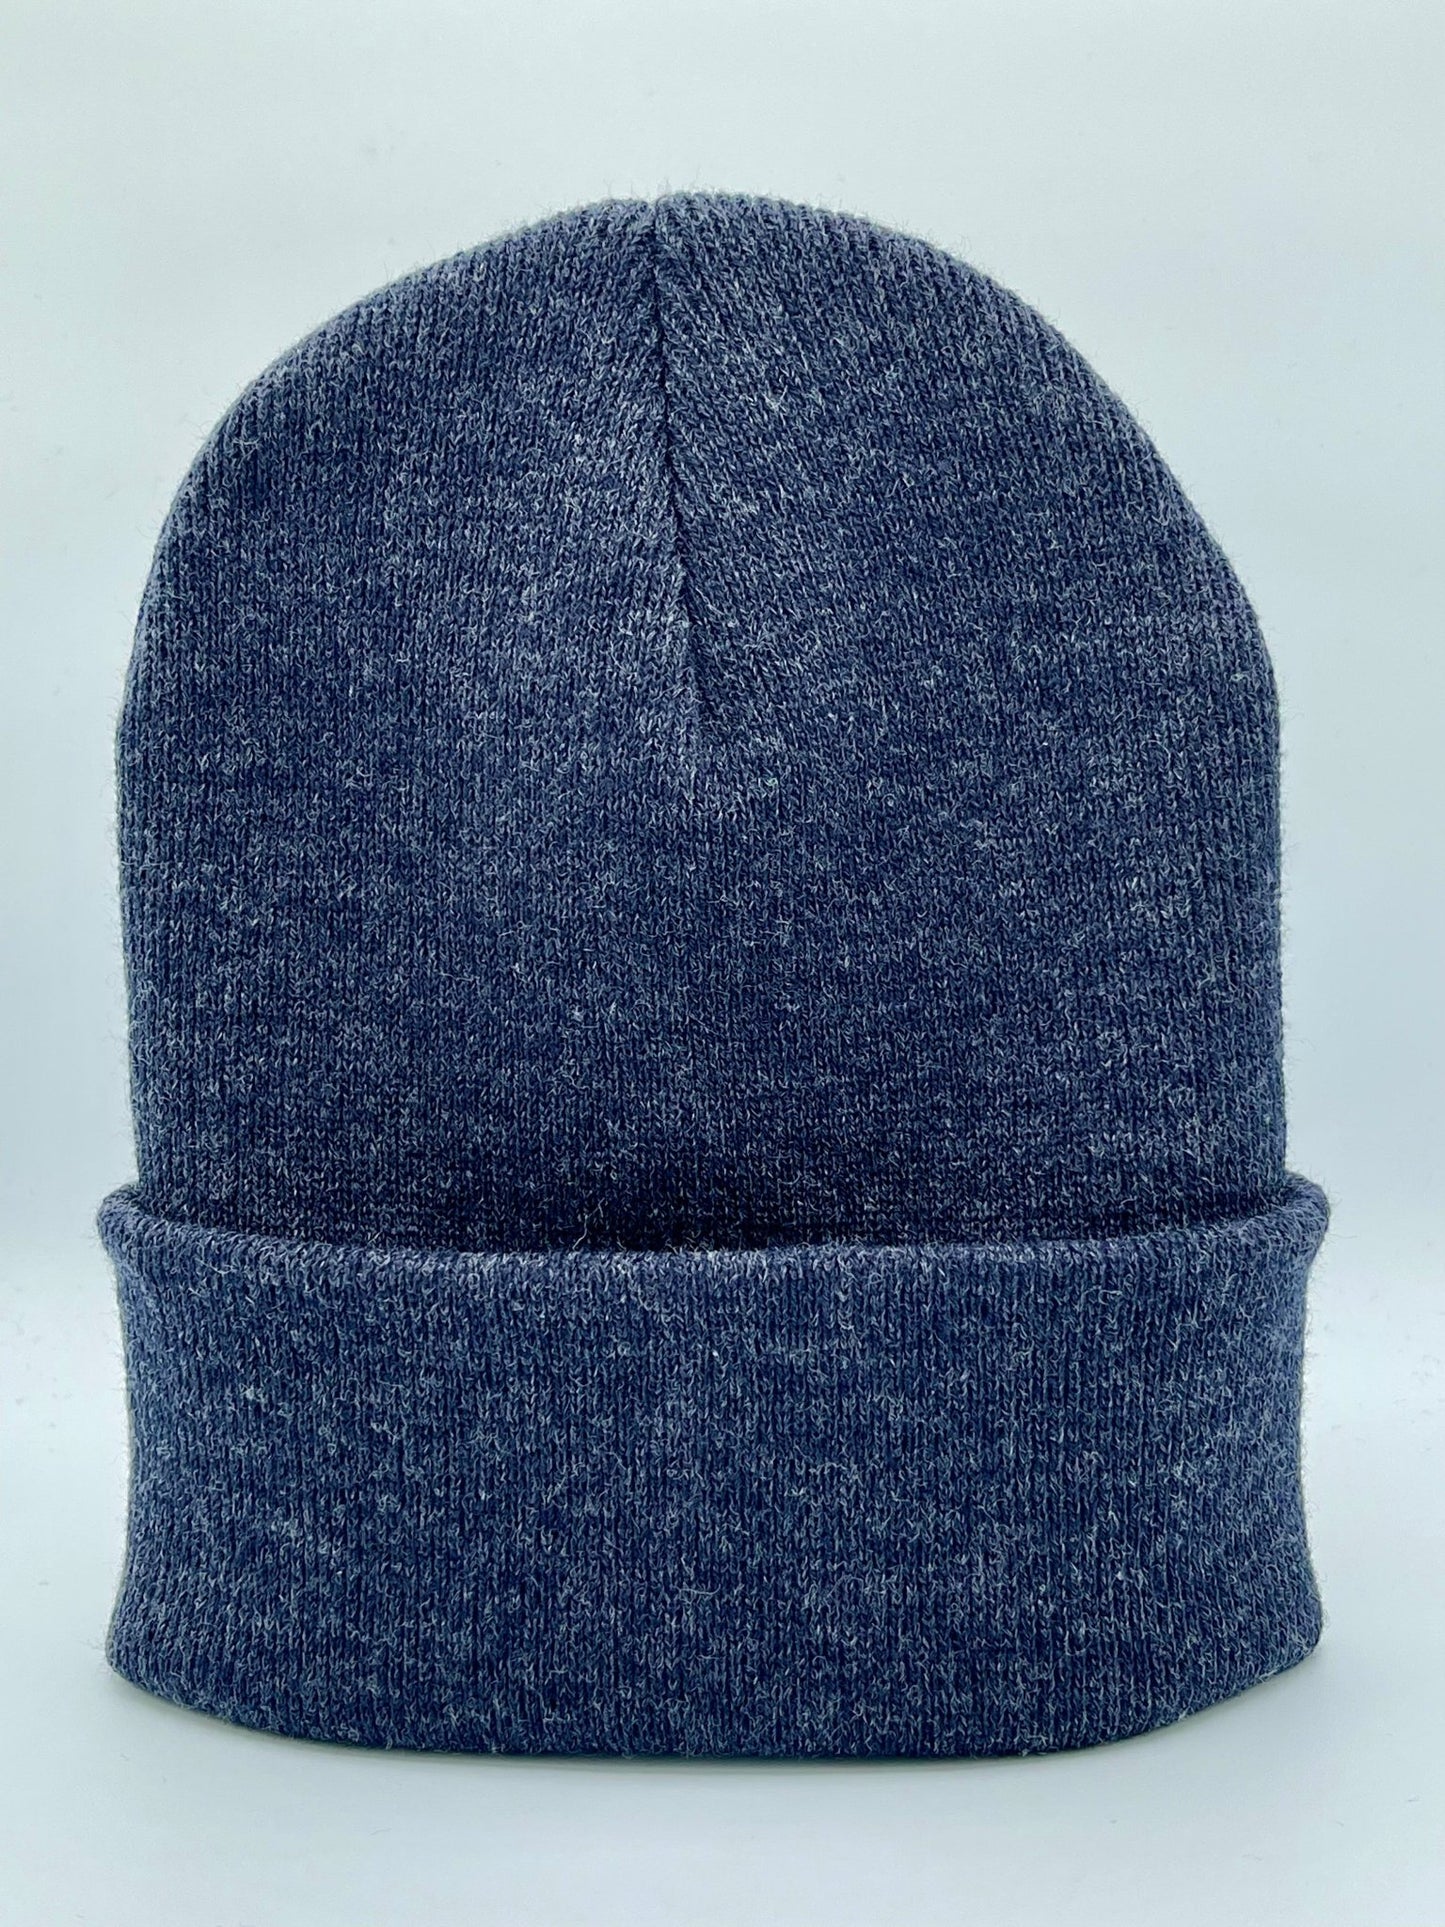 Blank Beanie Factory Cuffed Winter Hat, Wholesale price, Premium Quality, Denim Blue, Made in U.S.A - The Beanie Factory